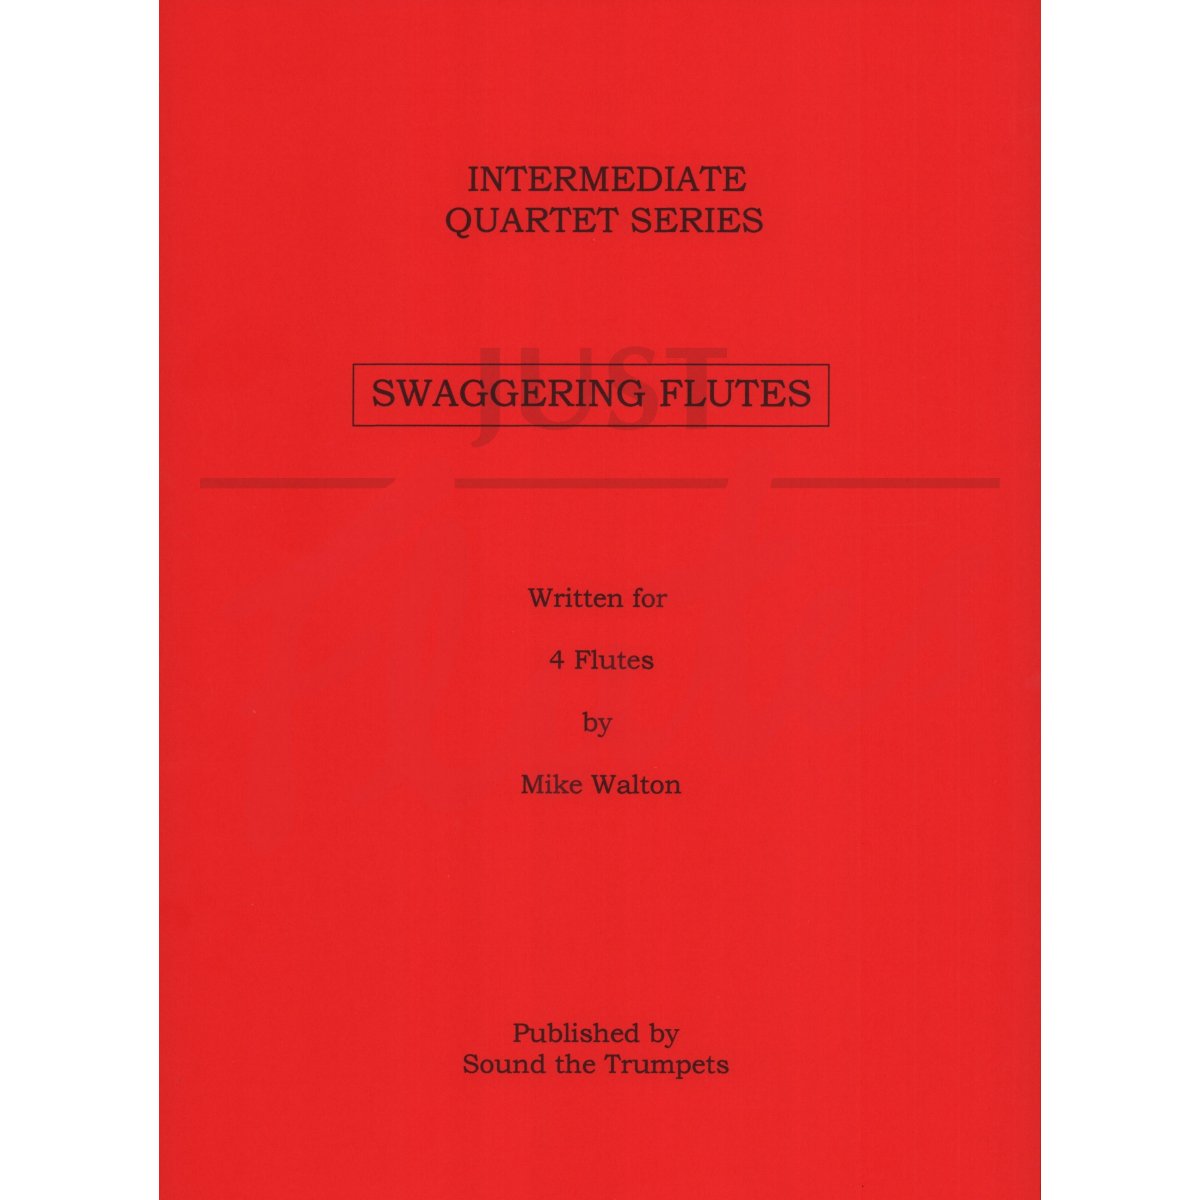 Swaggering Flutes for Four Flutes